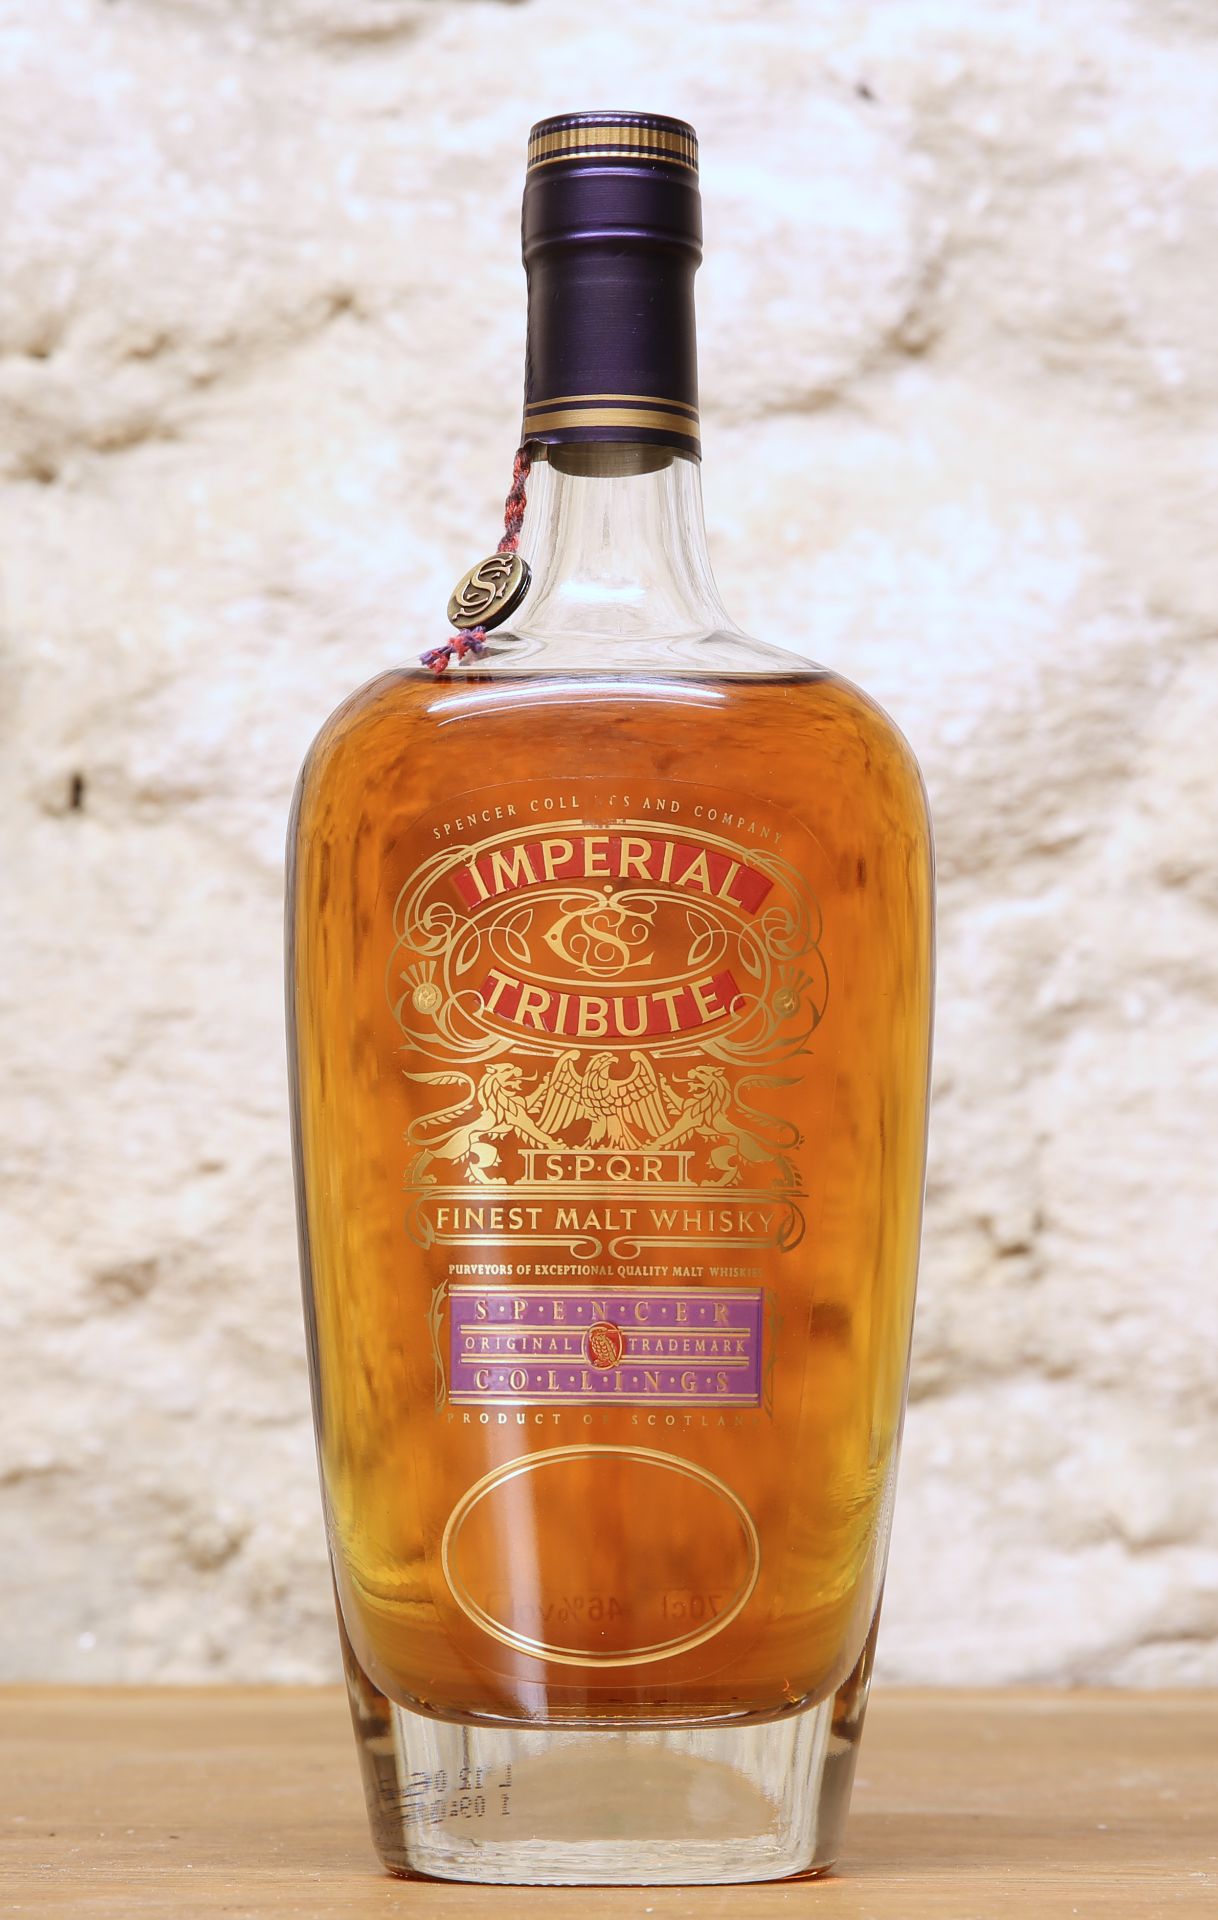 1 BOTTLE 'IMPERIAL TRIBUTE' 'EXCLUSIVE' SPENCER COLLINGS FINEST MALT WHISKY' - Image 2 of 2